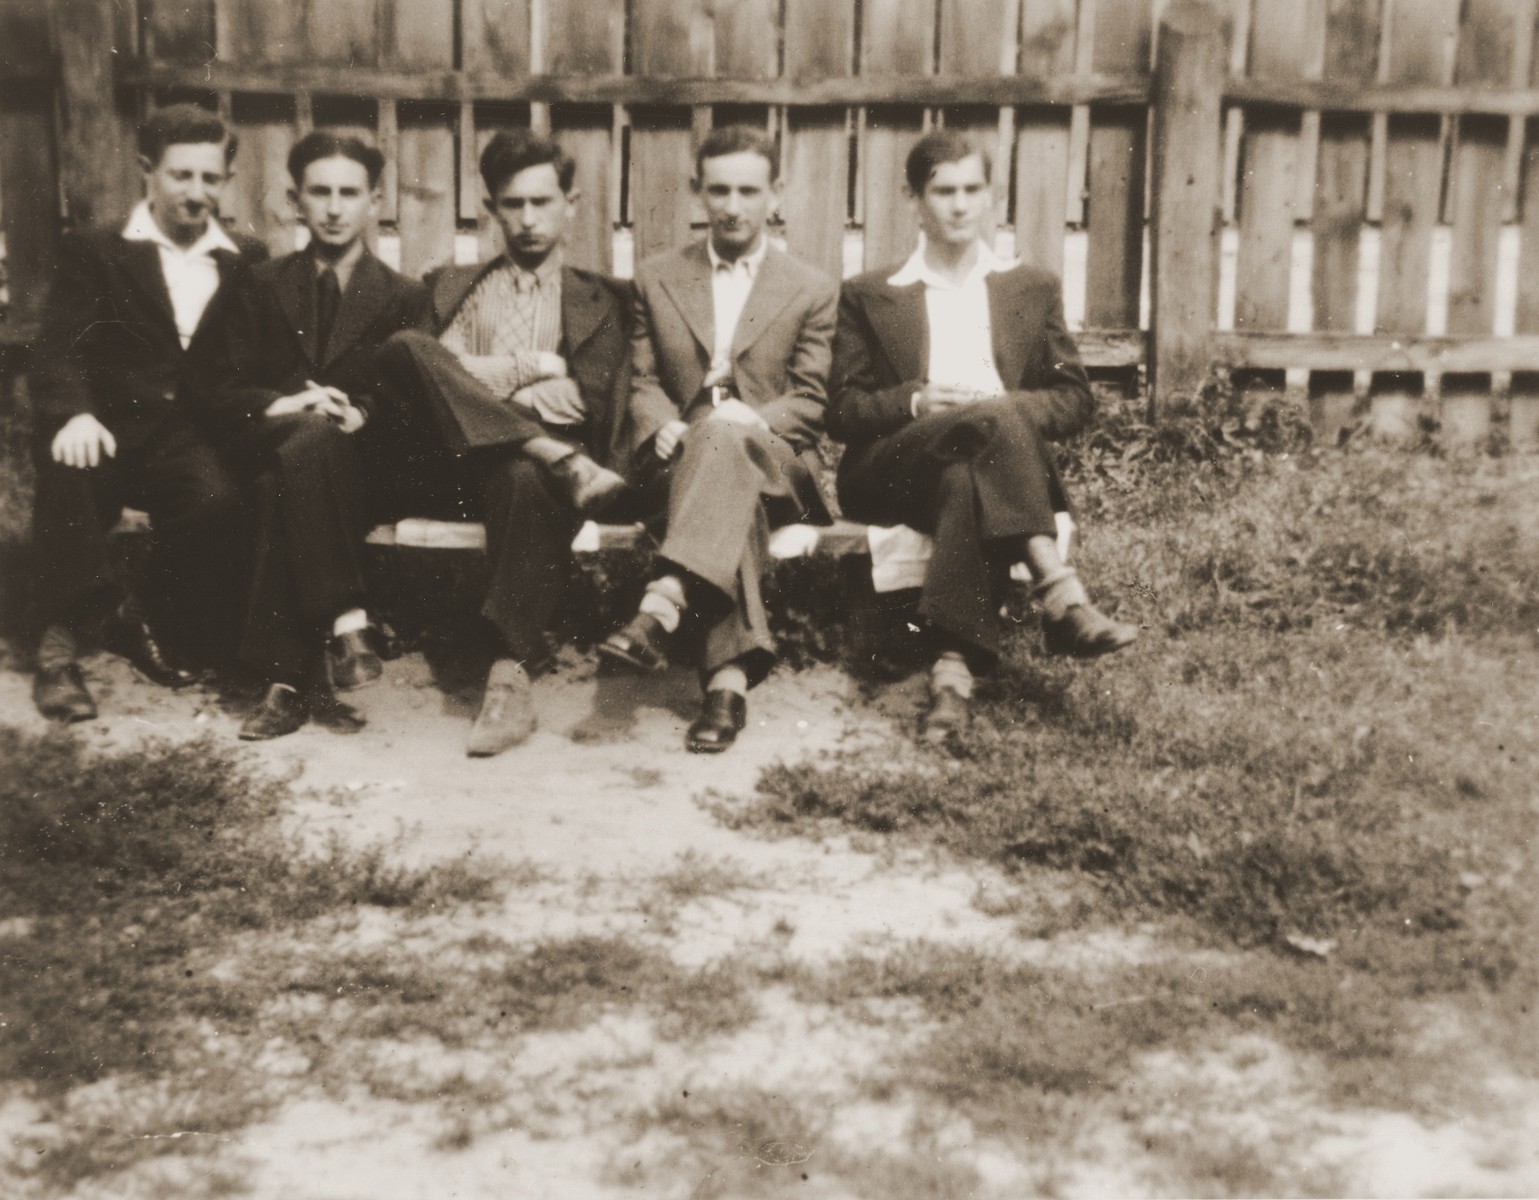 Five Jewish high school friends pose outside on a bench in front of a fence in Brody, Poland.  

Among those pictured are: Joseph Ettinger (right) and Henryk Lanceter (second from the right).